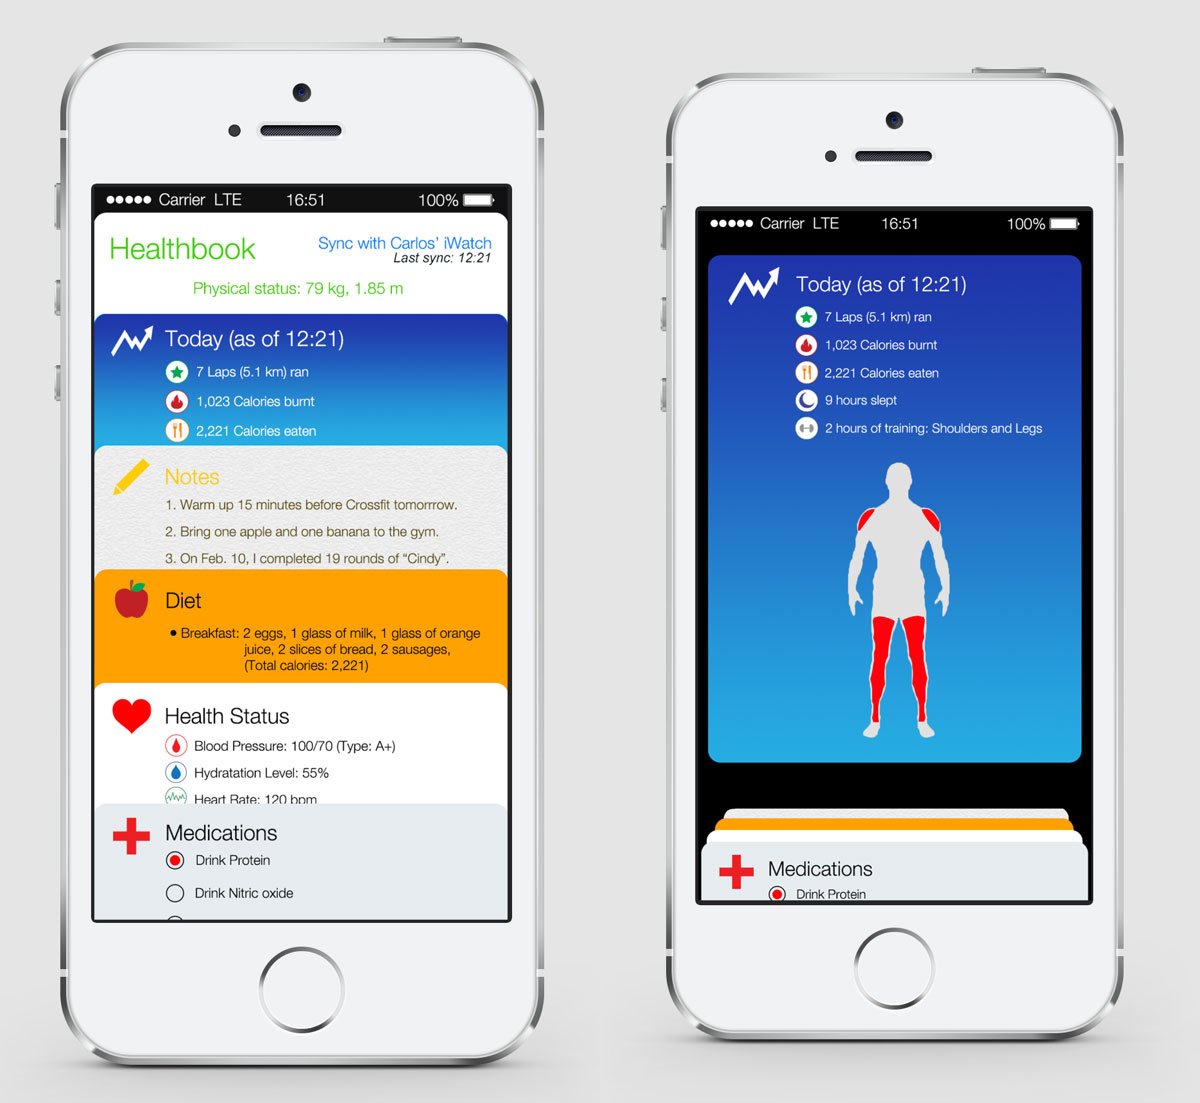 A new iOS 8 concept brings rumors to life, showing a health and fitness app.